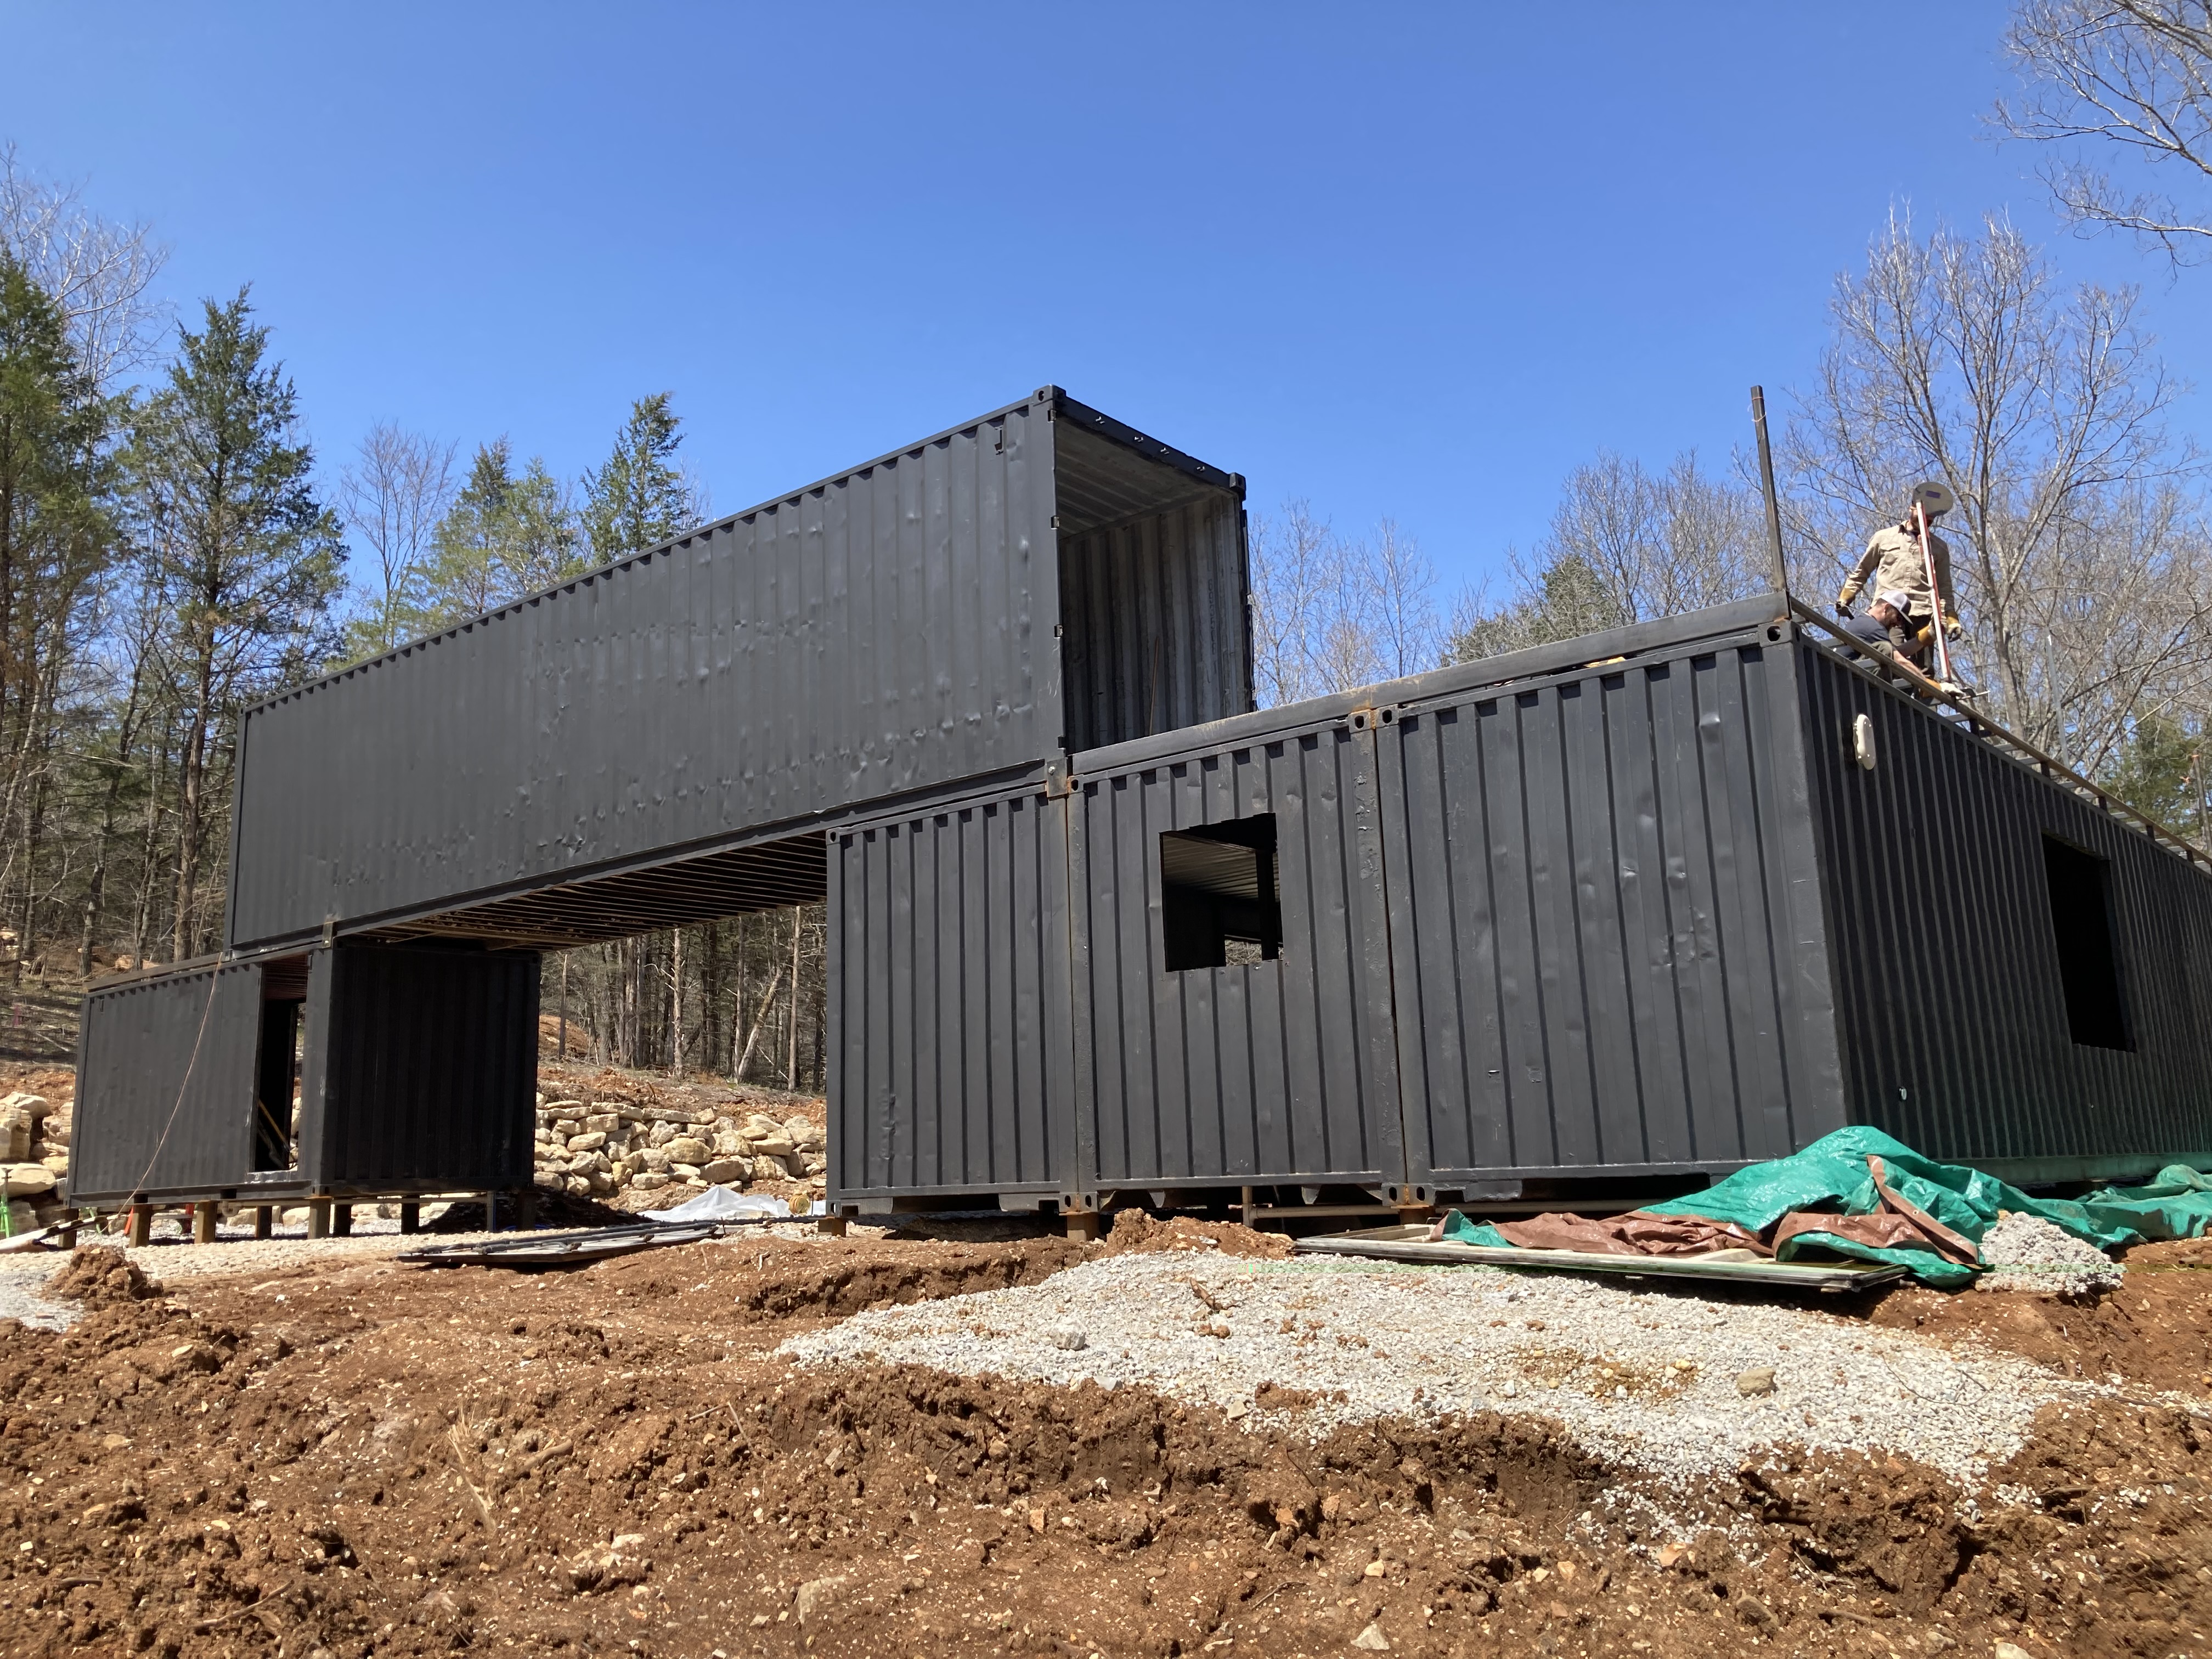 Base camp at Howler Bike Park is being built out of repurposed shipping containers and will include a bike shop, pro shop, first-aid station and event stage.